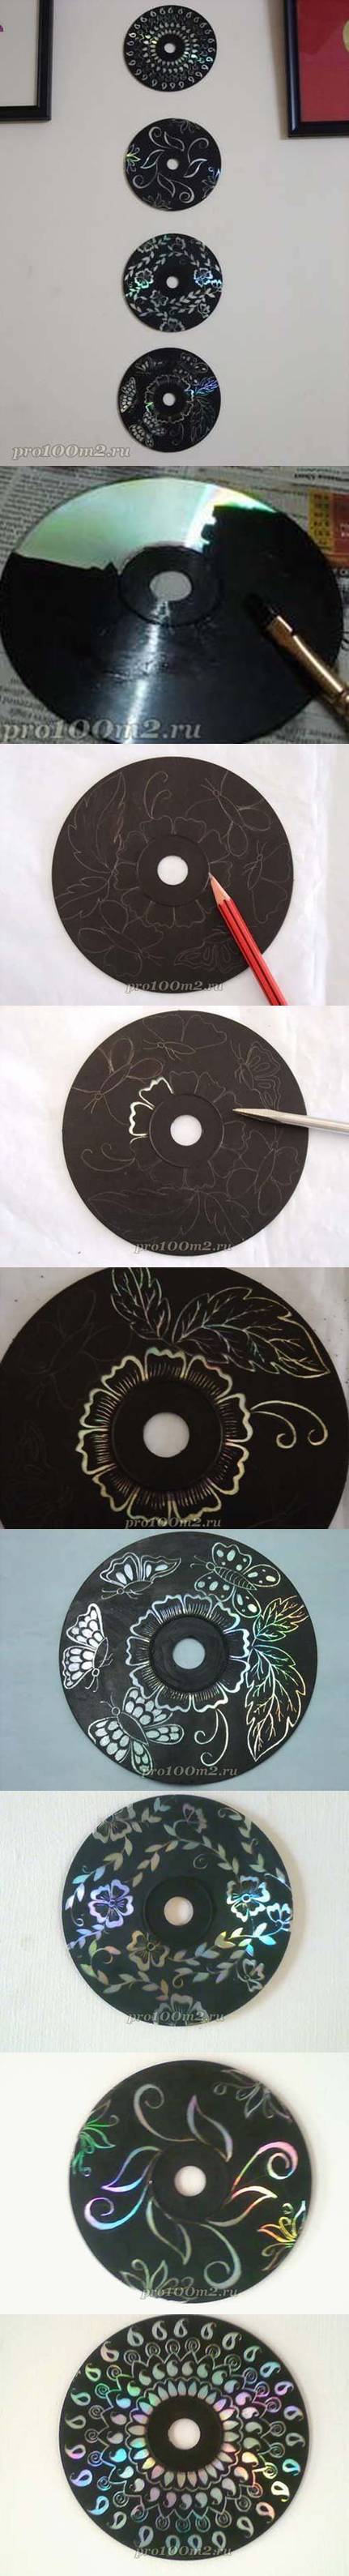 DIY Wall Decoration with CD